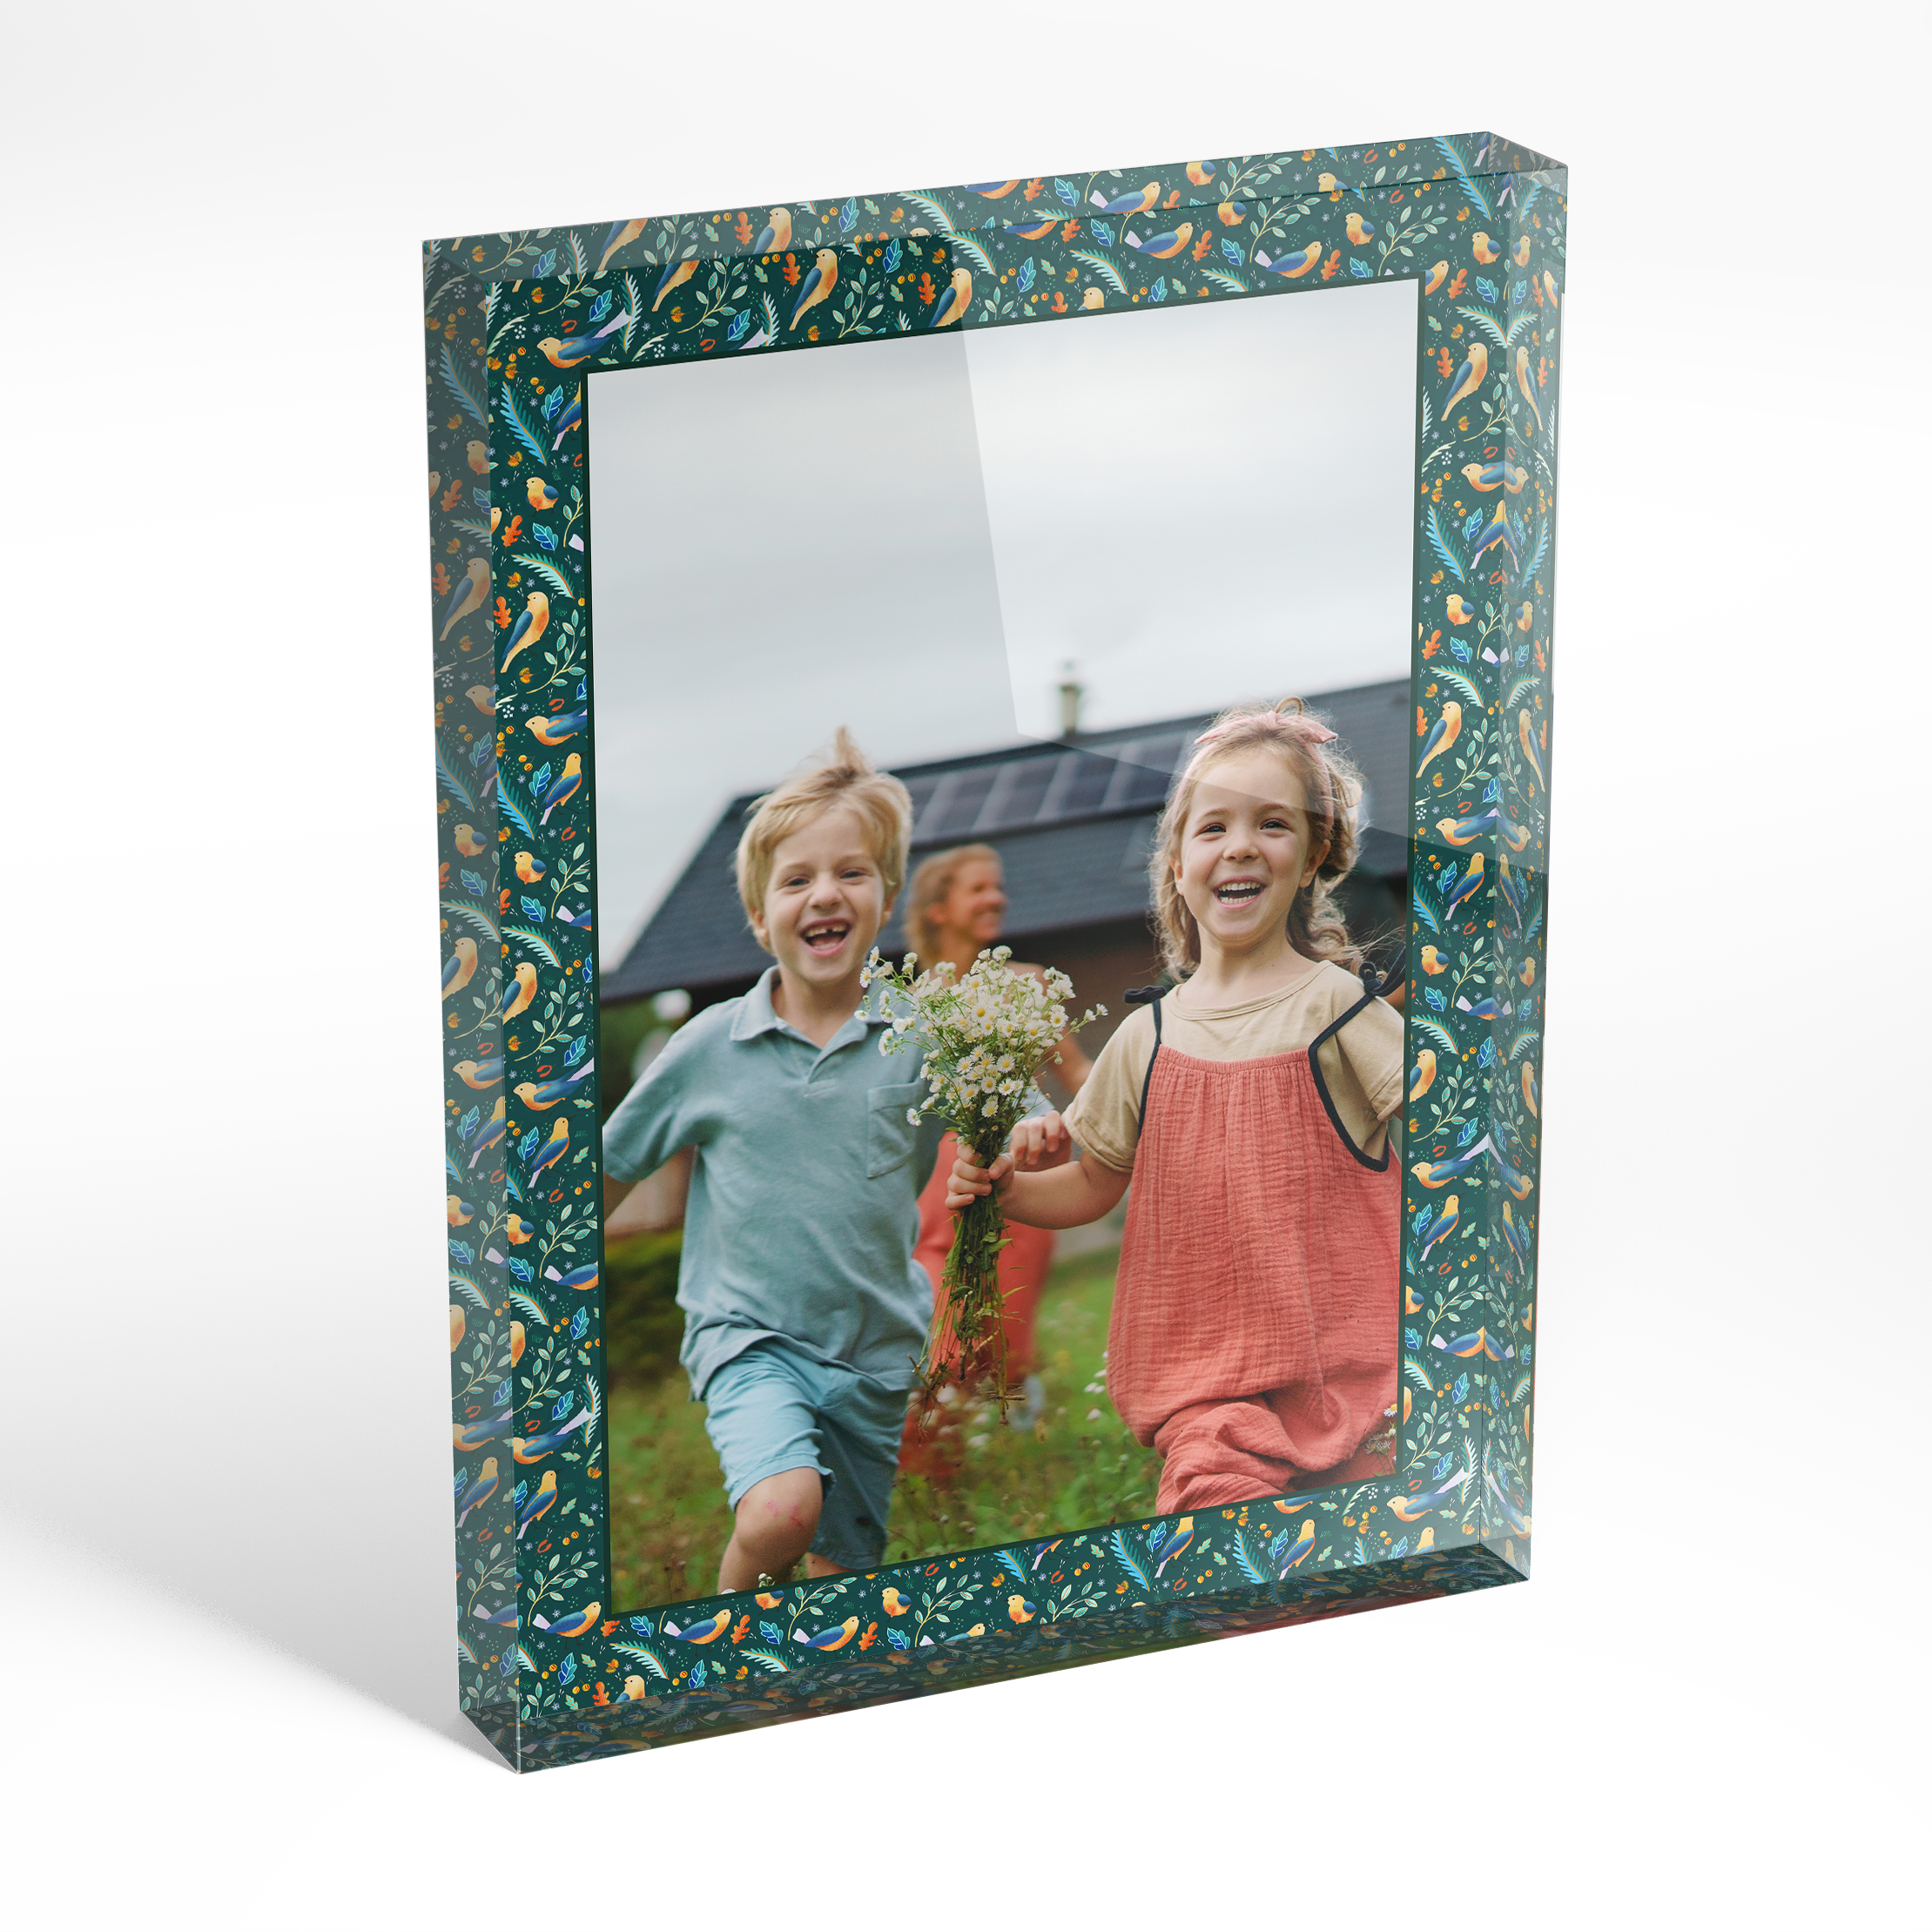 An angled side view of a portrait layout Acrylic Glass Photo Block with space for 1 photo. Thiis design is named "Heritage Portrait". 